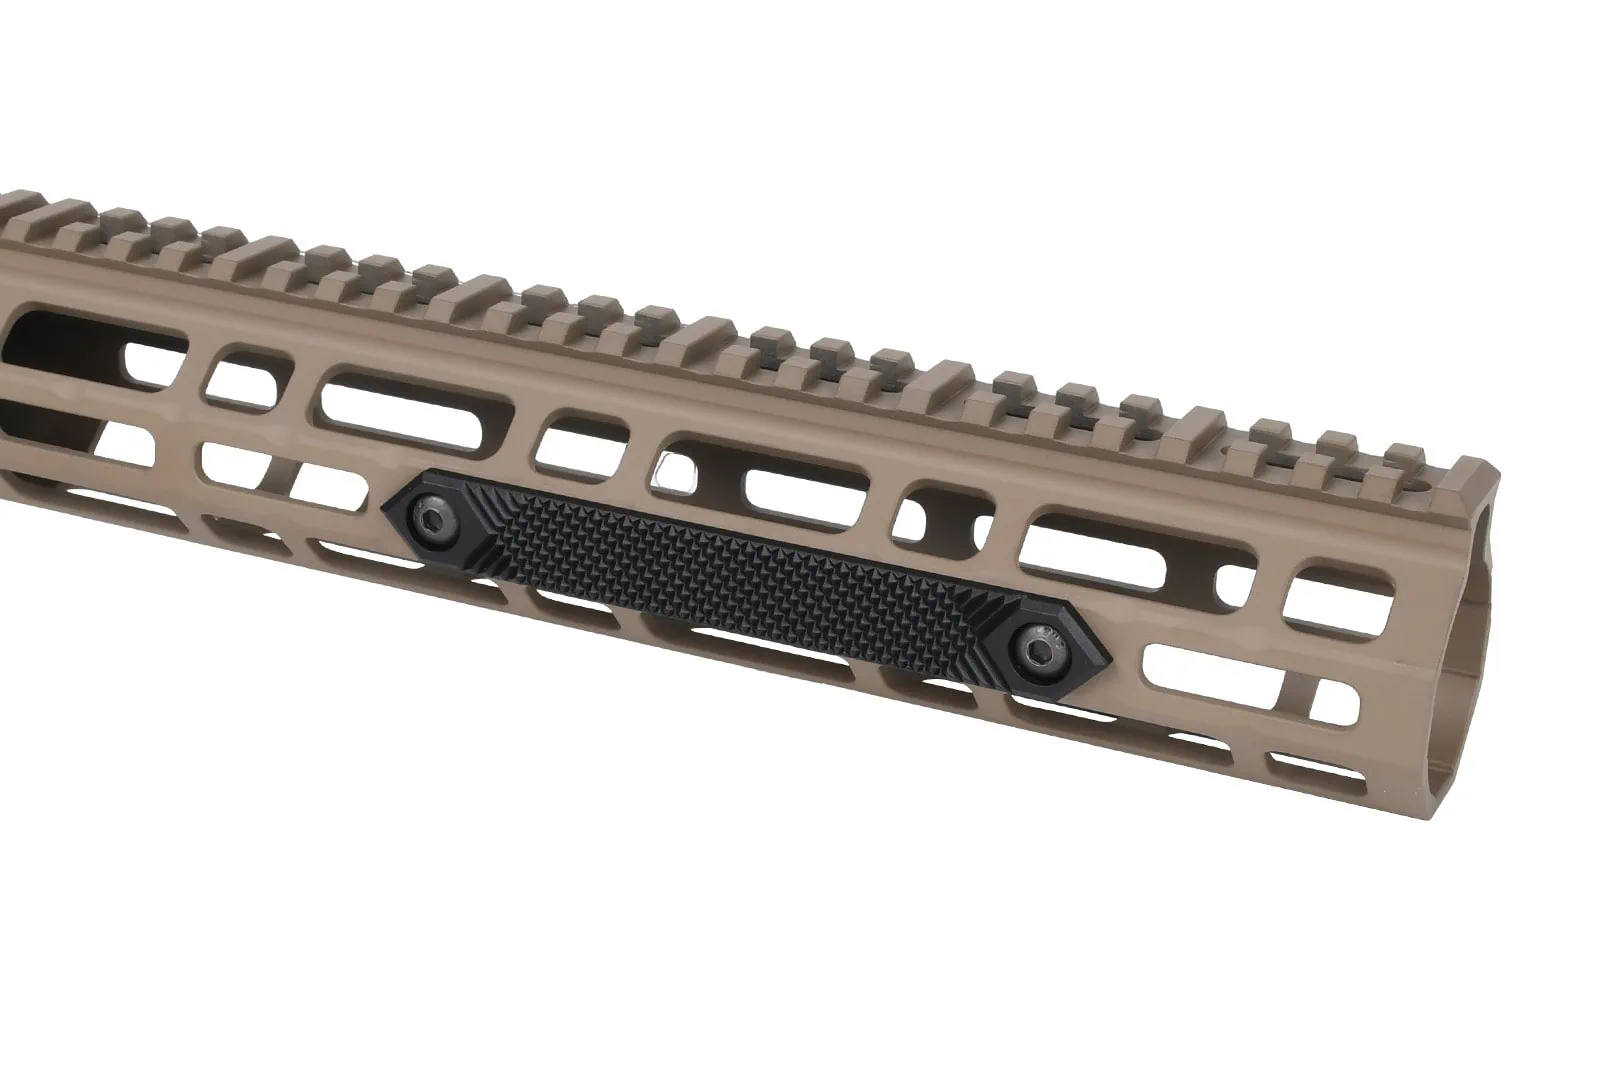 AT3 M-LOK Rail Covers – Retro & Old Glory Design - 2 Colors Available